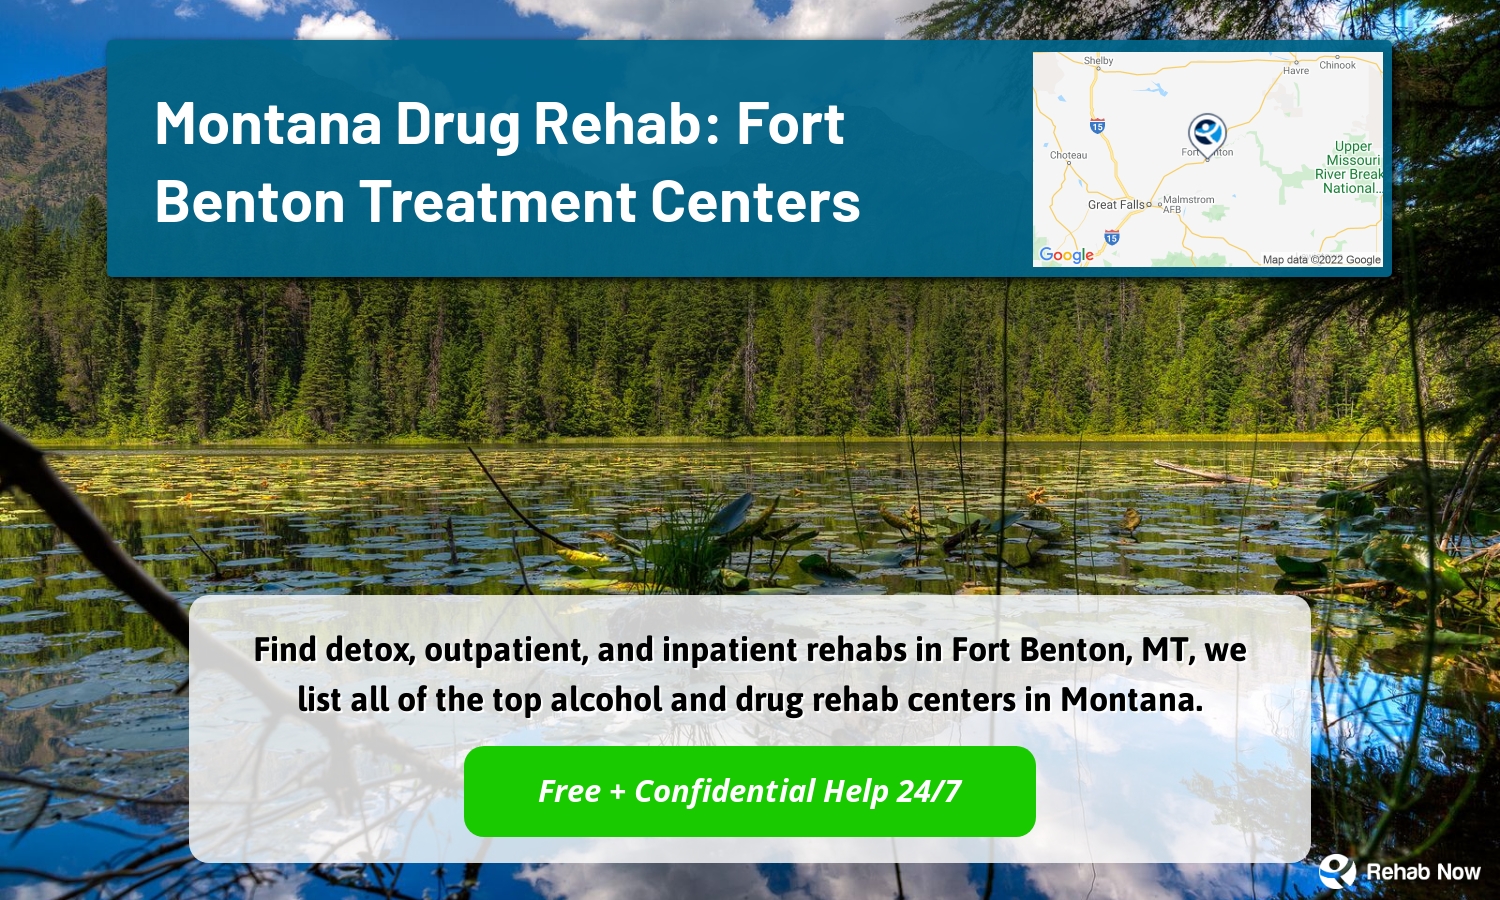 Find detox, outpatient, and inpatient rehabs in Fort Benton, MT, we list all of the top alcohol and drug rehab centers in Montana.